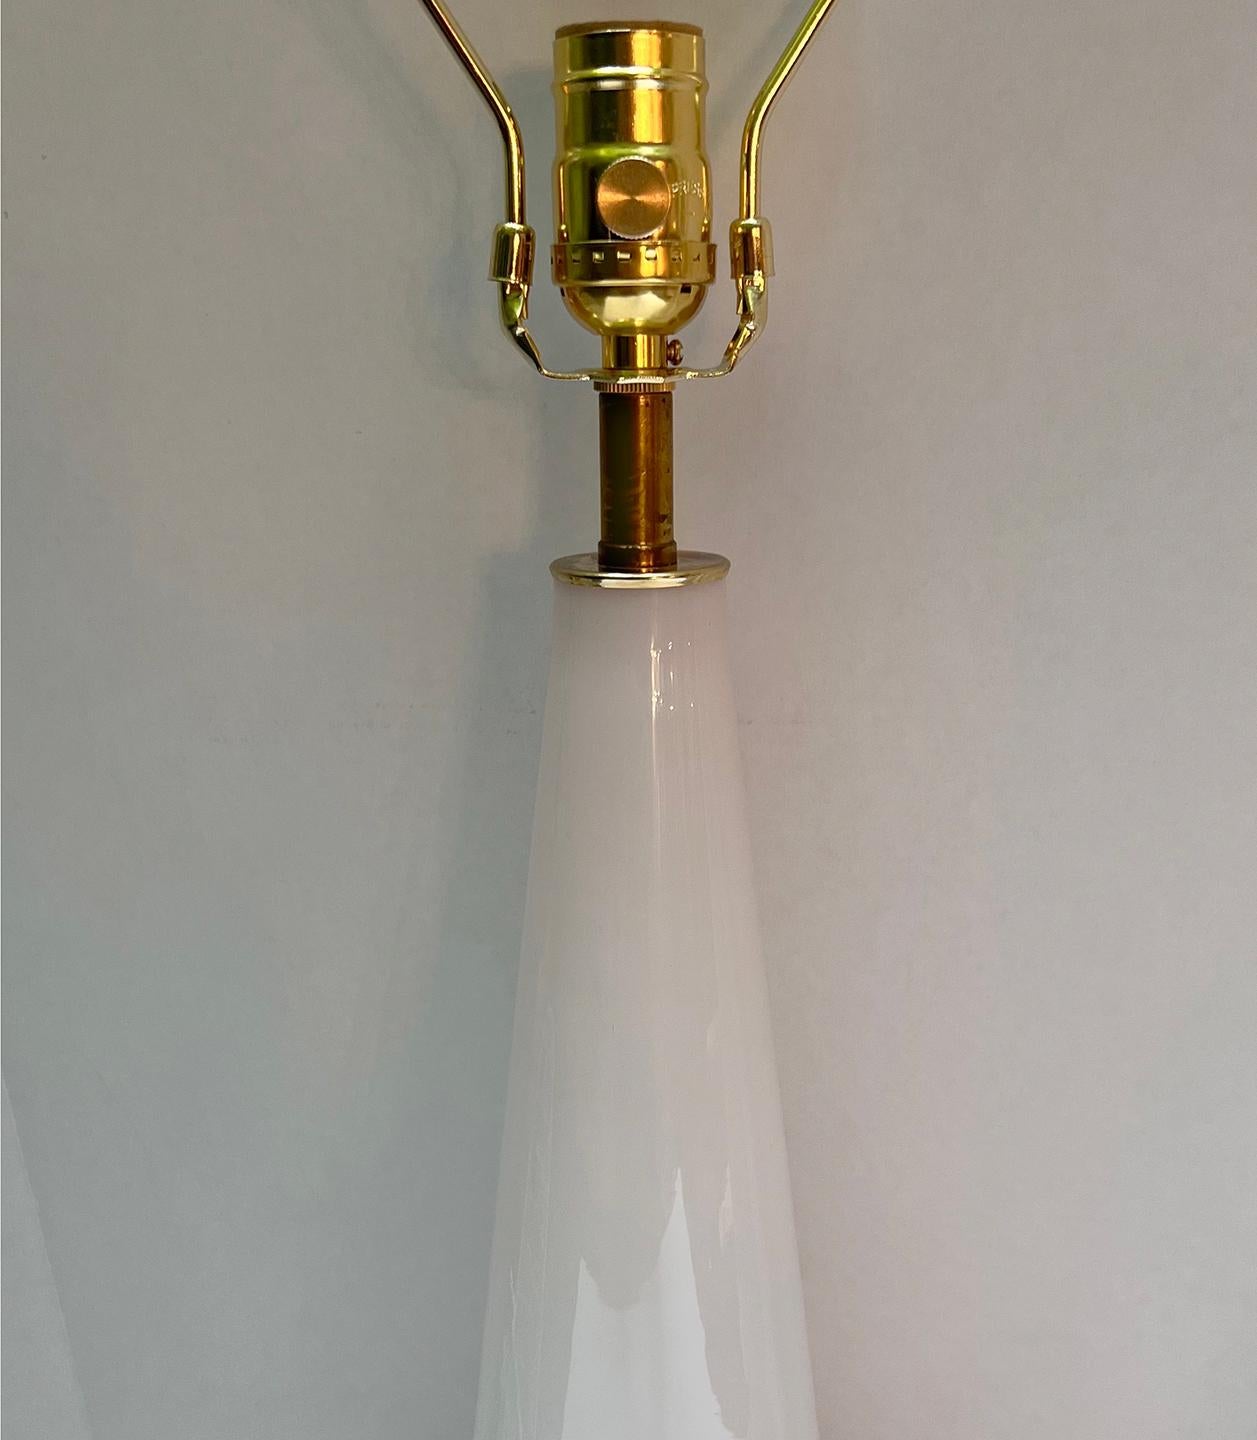 Pair of circa 1940's French pink opaline table lamps with gilt bases.

Measurements:
Height of body: 19.5